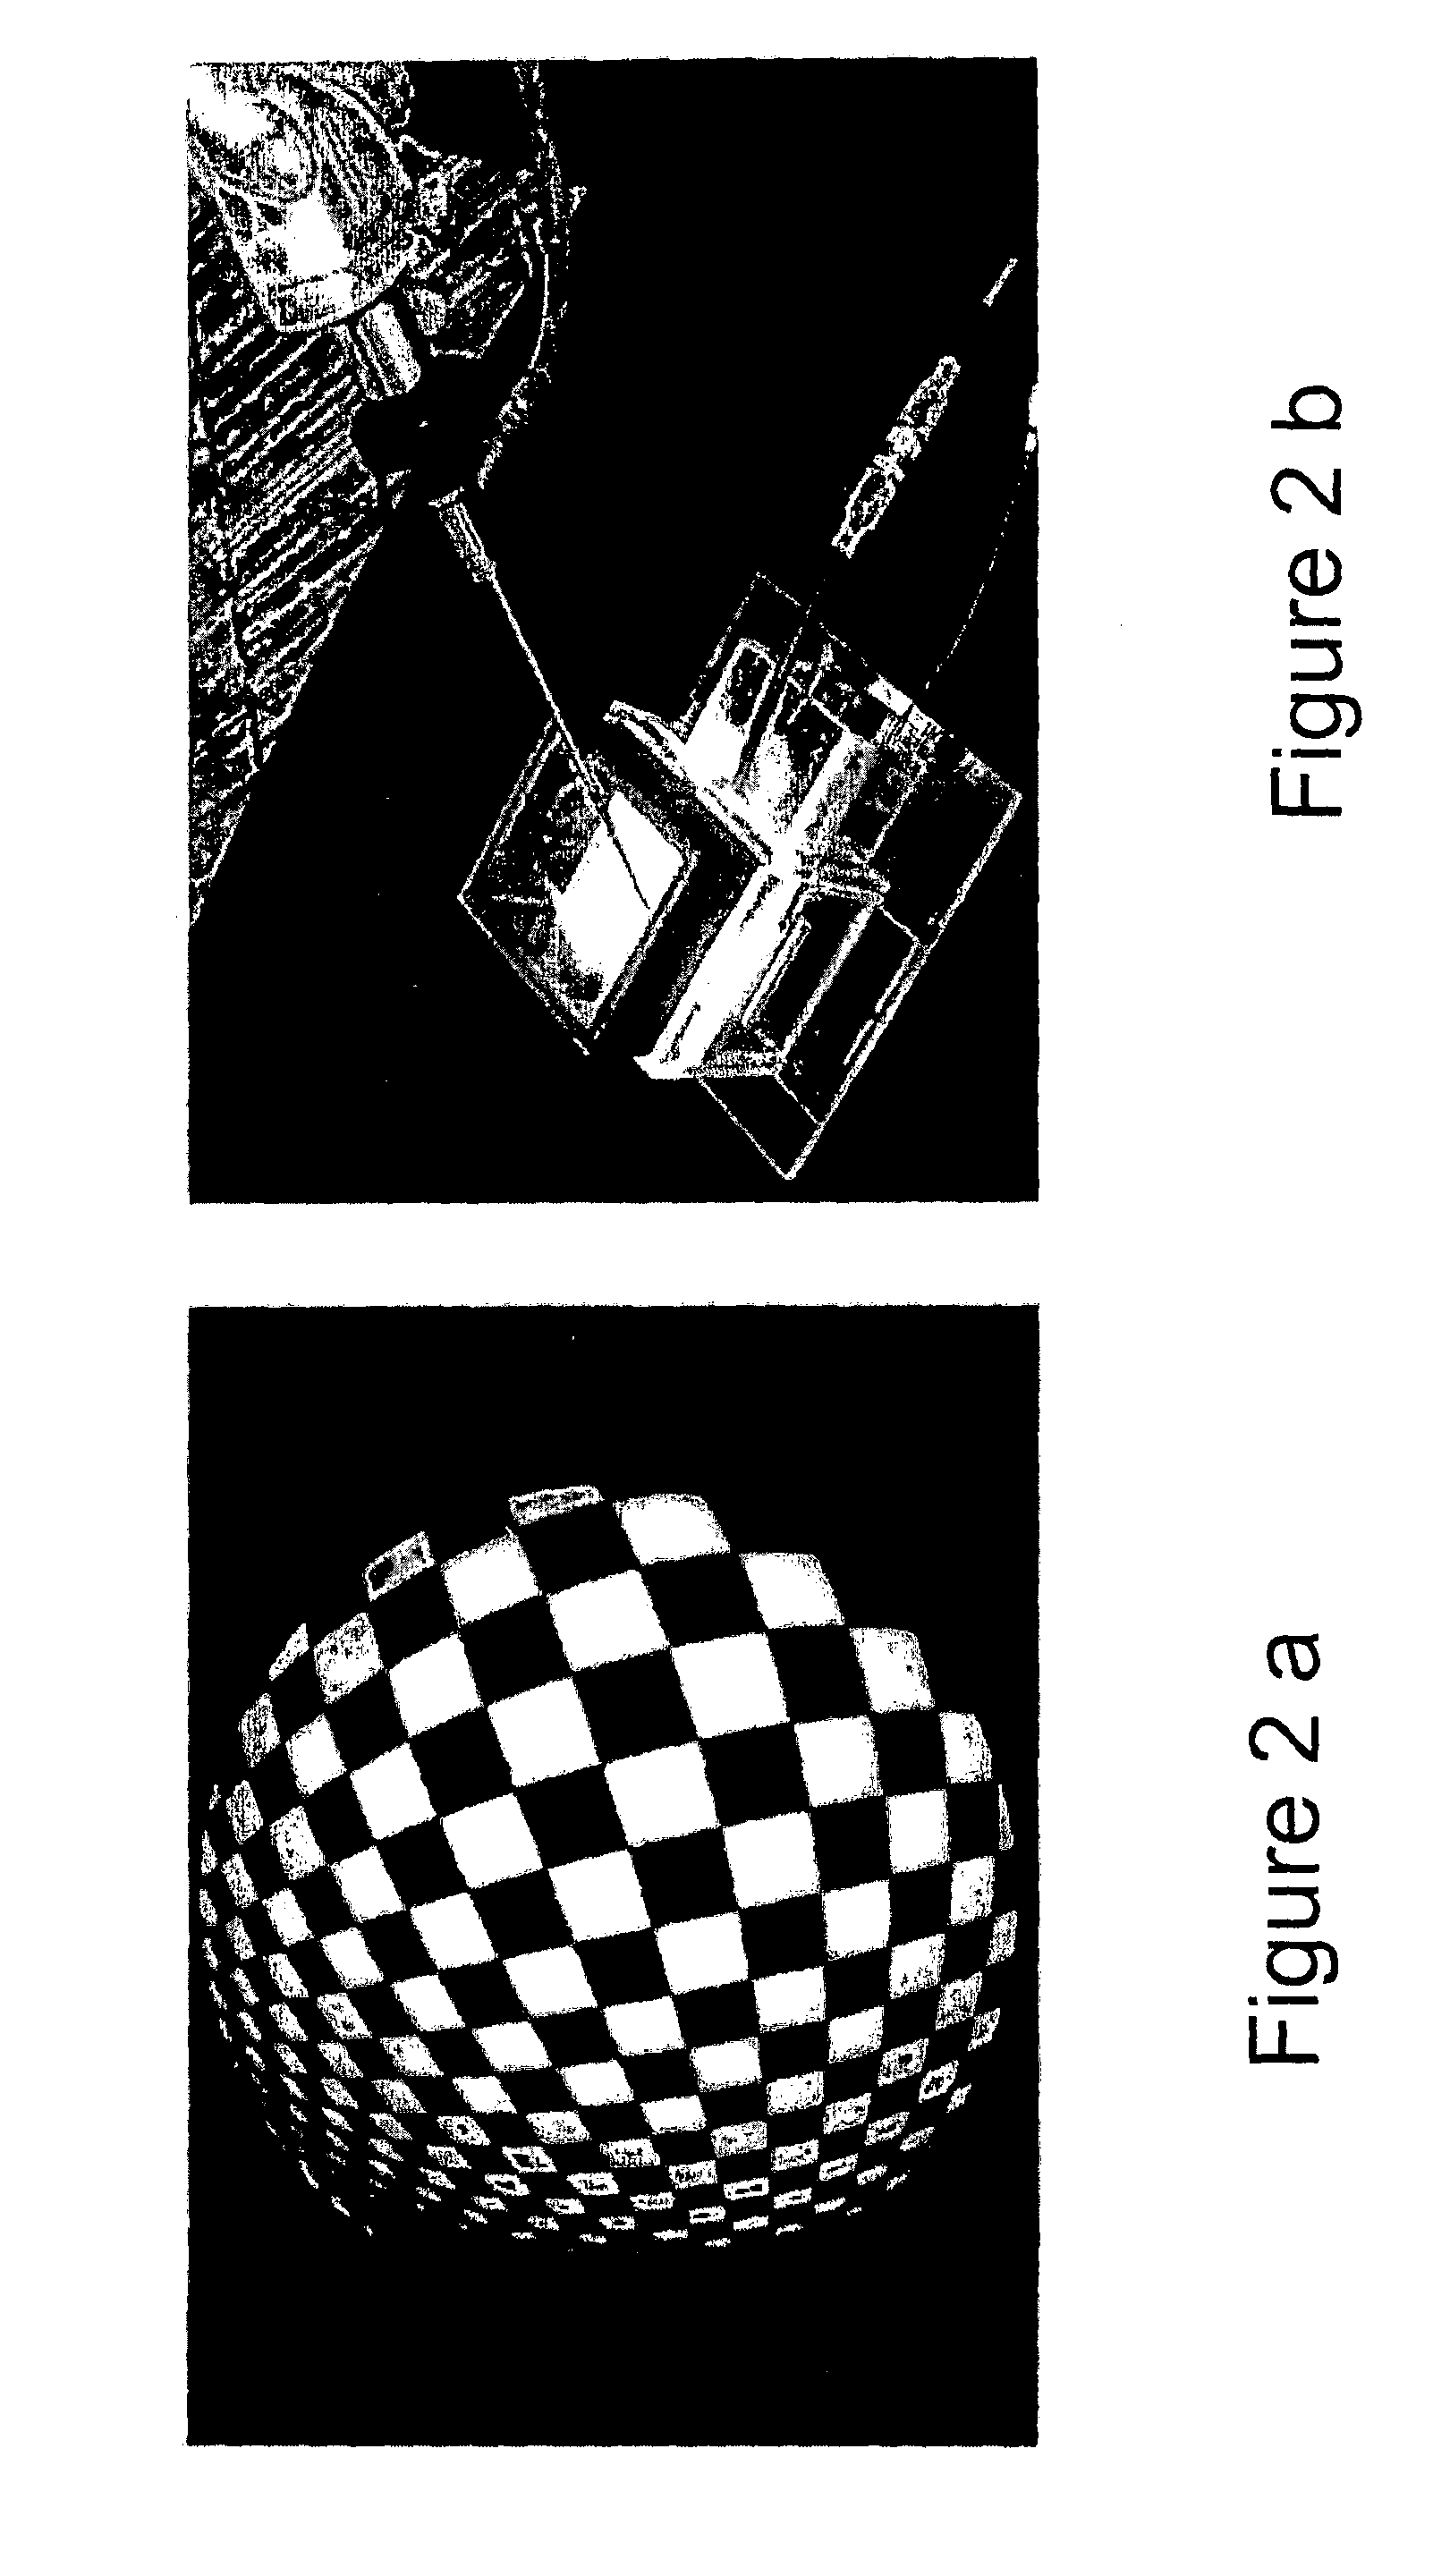 Method and apparatus for automatic camera calibration using one or more images of a checkerboard pattern